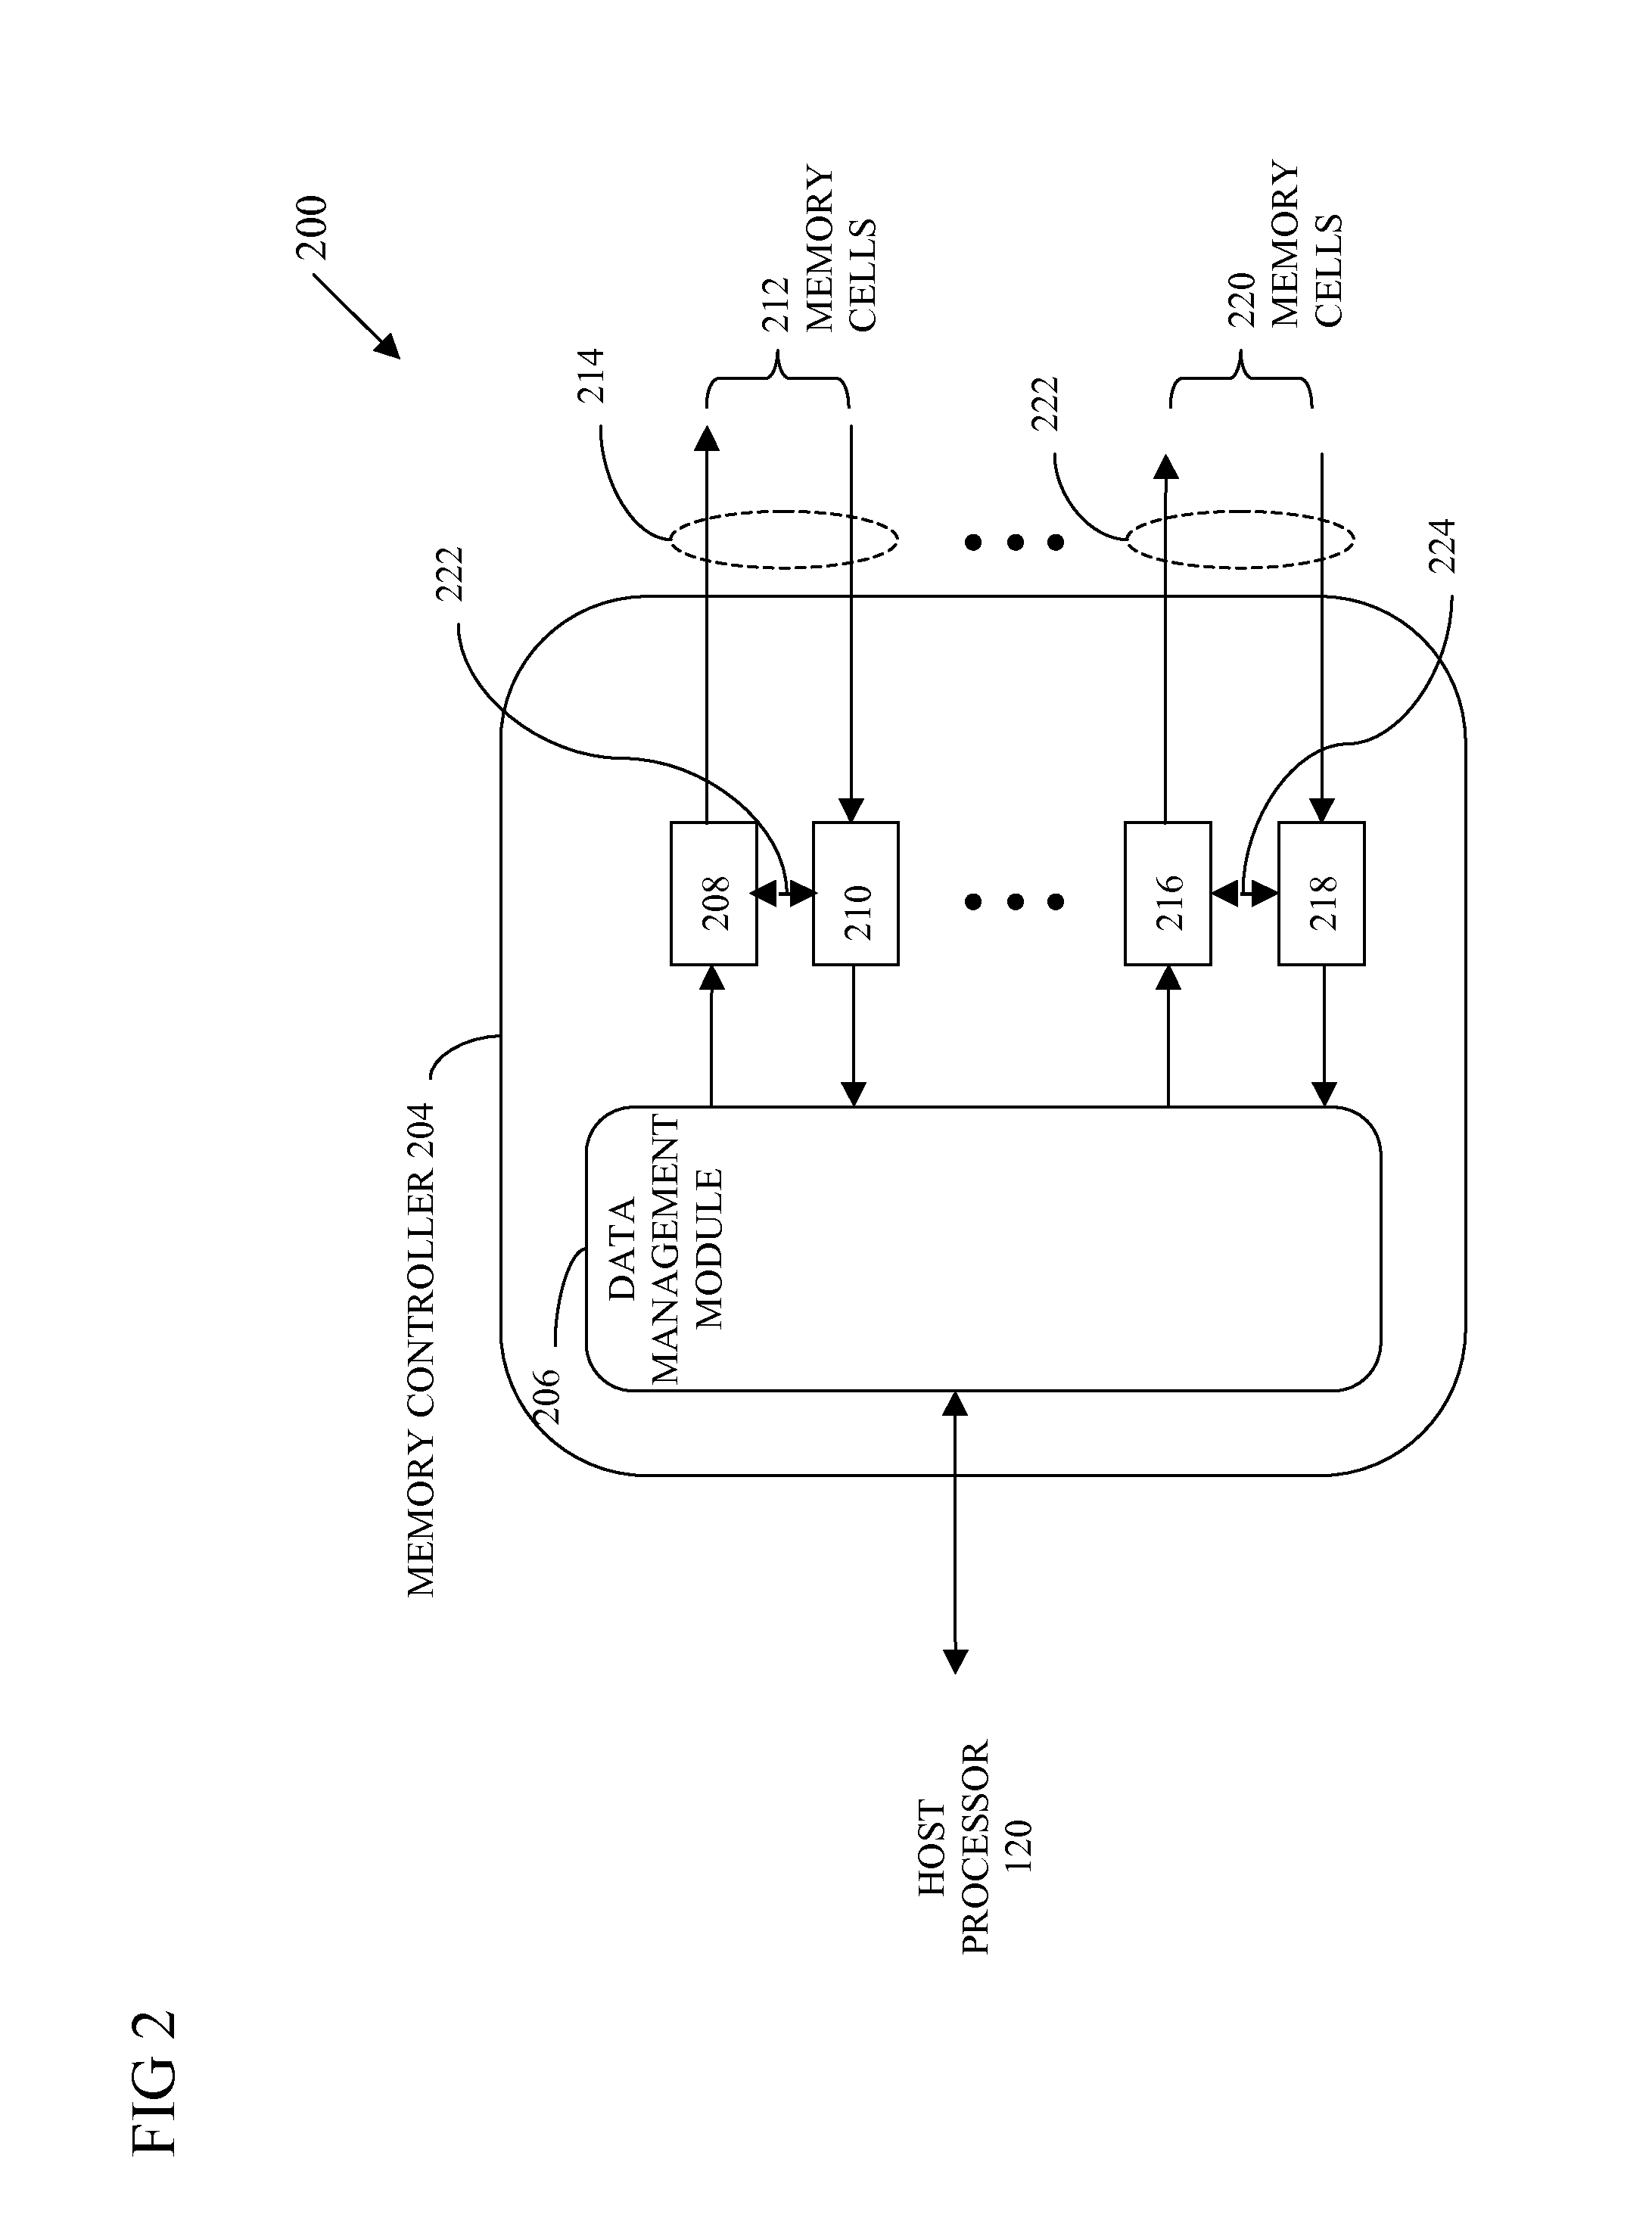 Apparatus and method for adjusting a correctable raw bit error rate limit in a memory system using strong log-likelihood (LLR) values